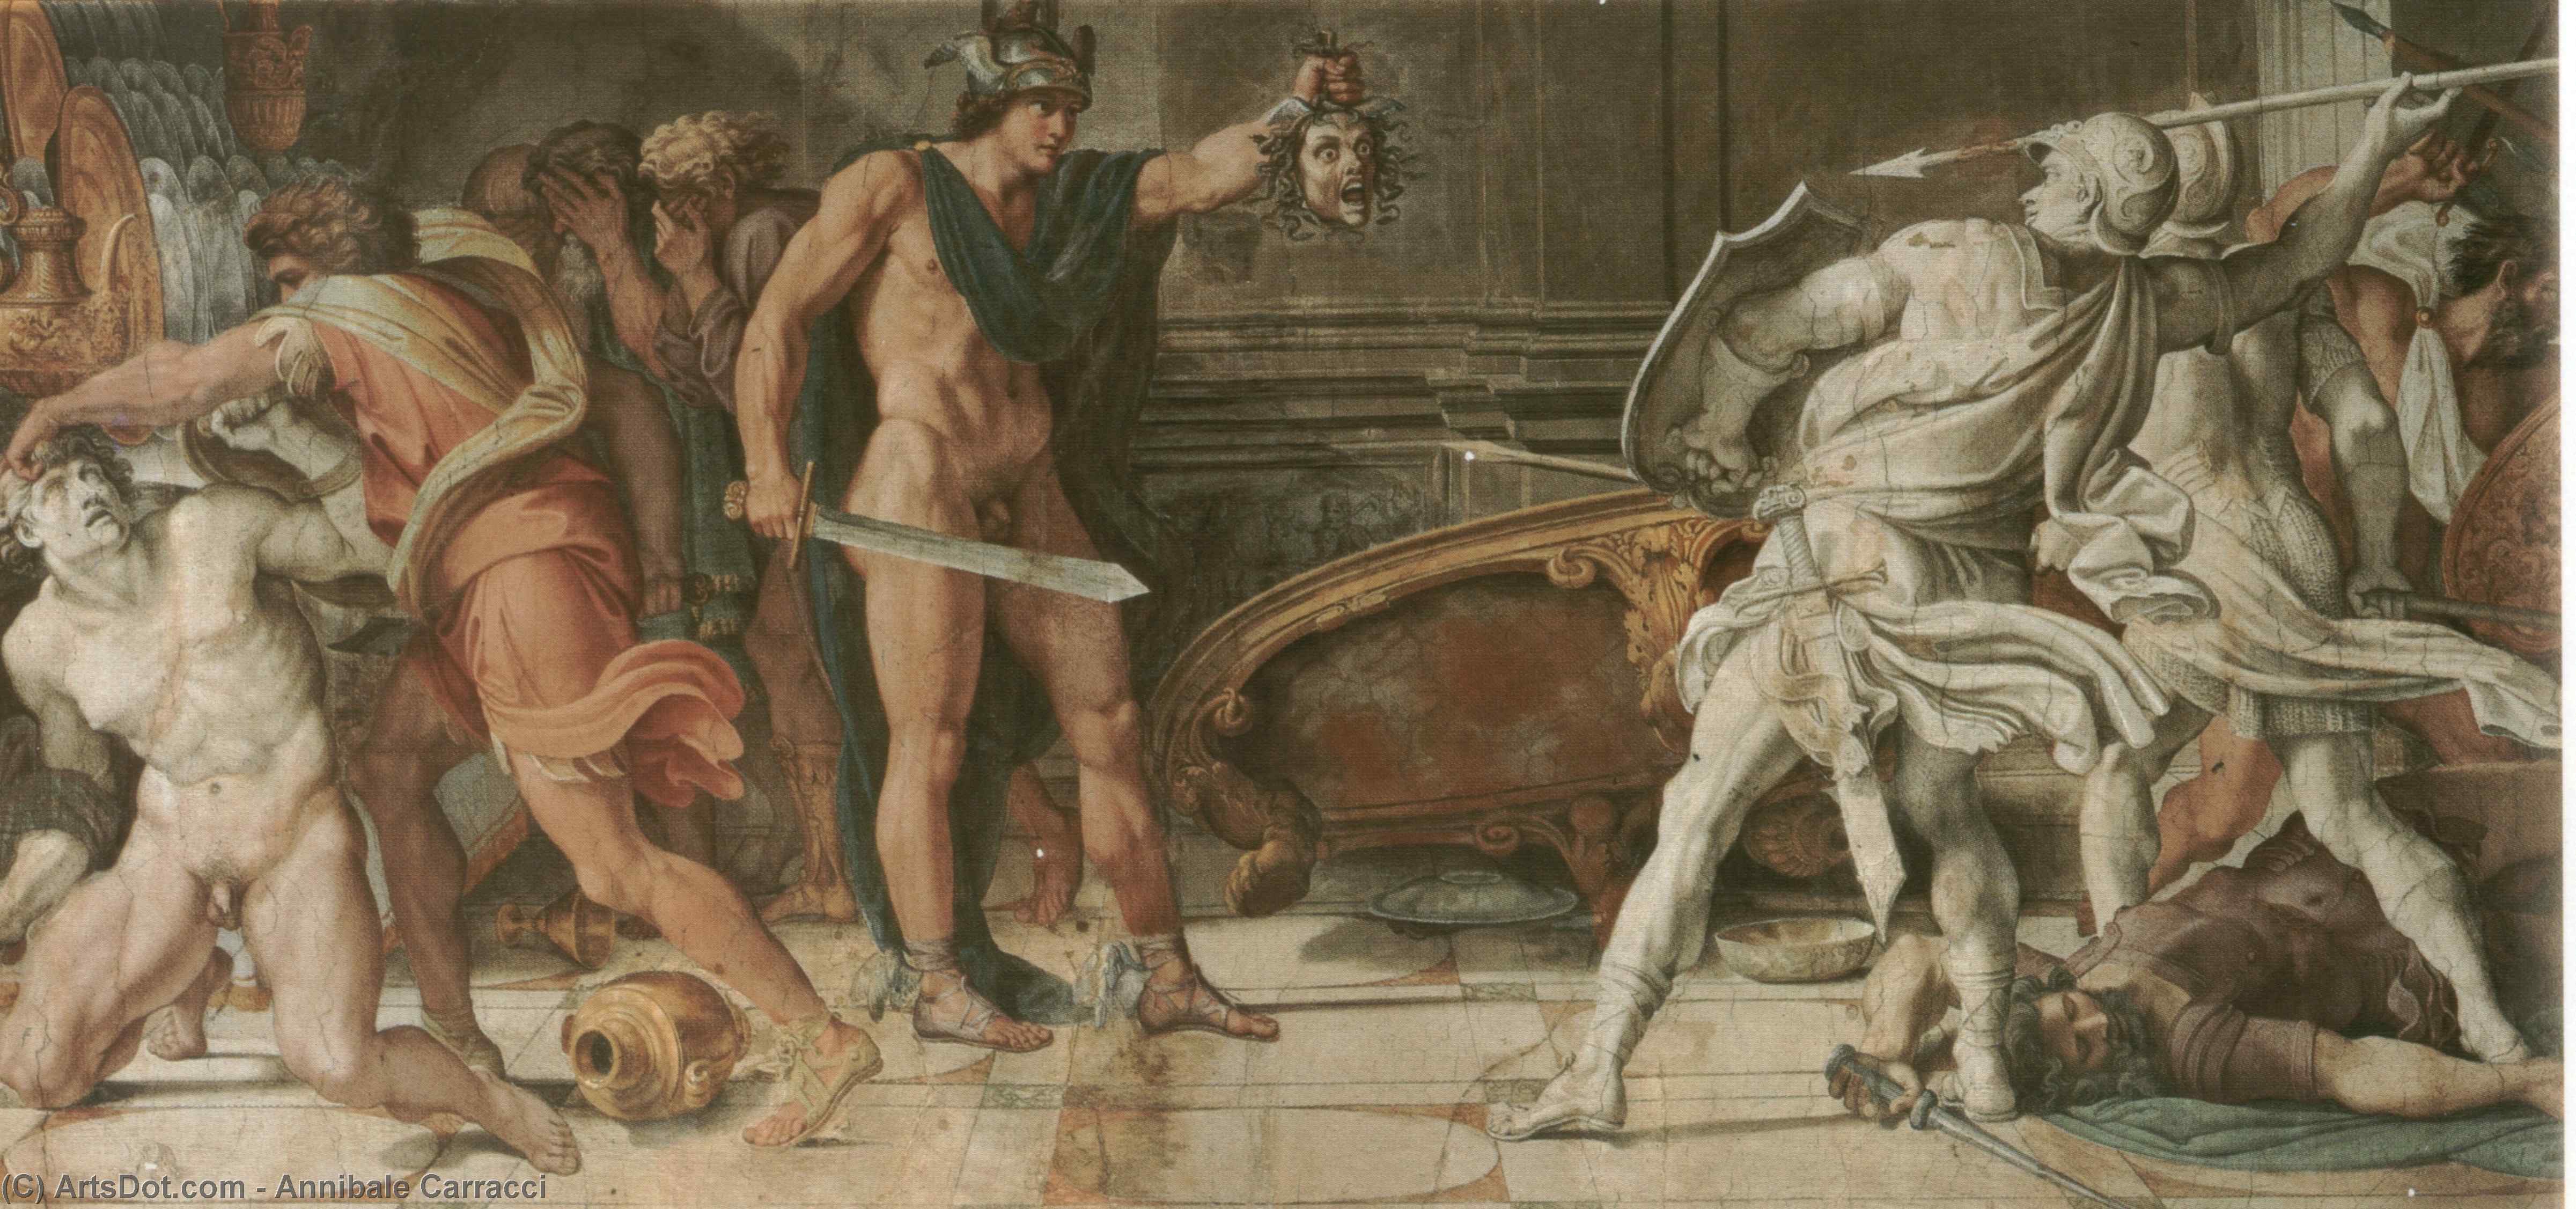 WikiOO.org - 백과 사전 - 회화, 삽화 Annibale Carracci - Perseus and Phineas